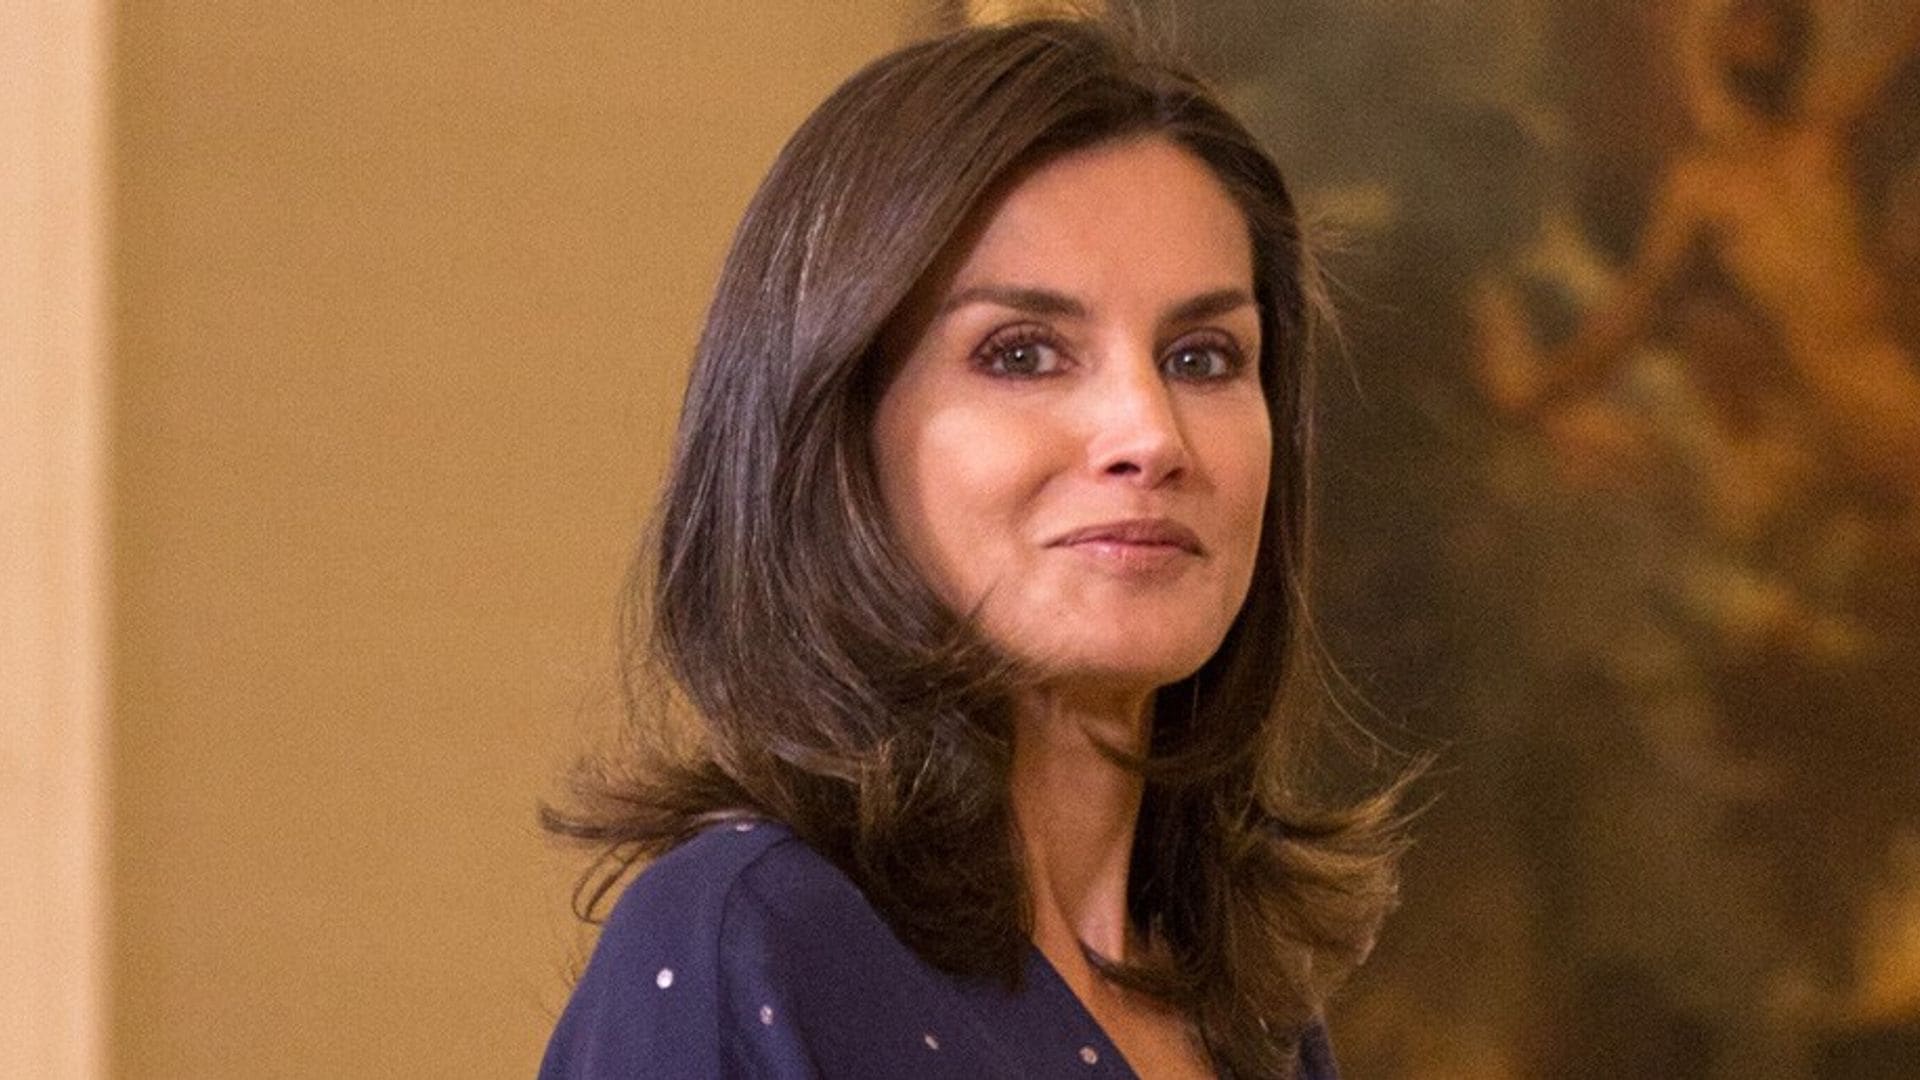 Did Queen Letizia turn to this fashionable first lady for style inspiration?